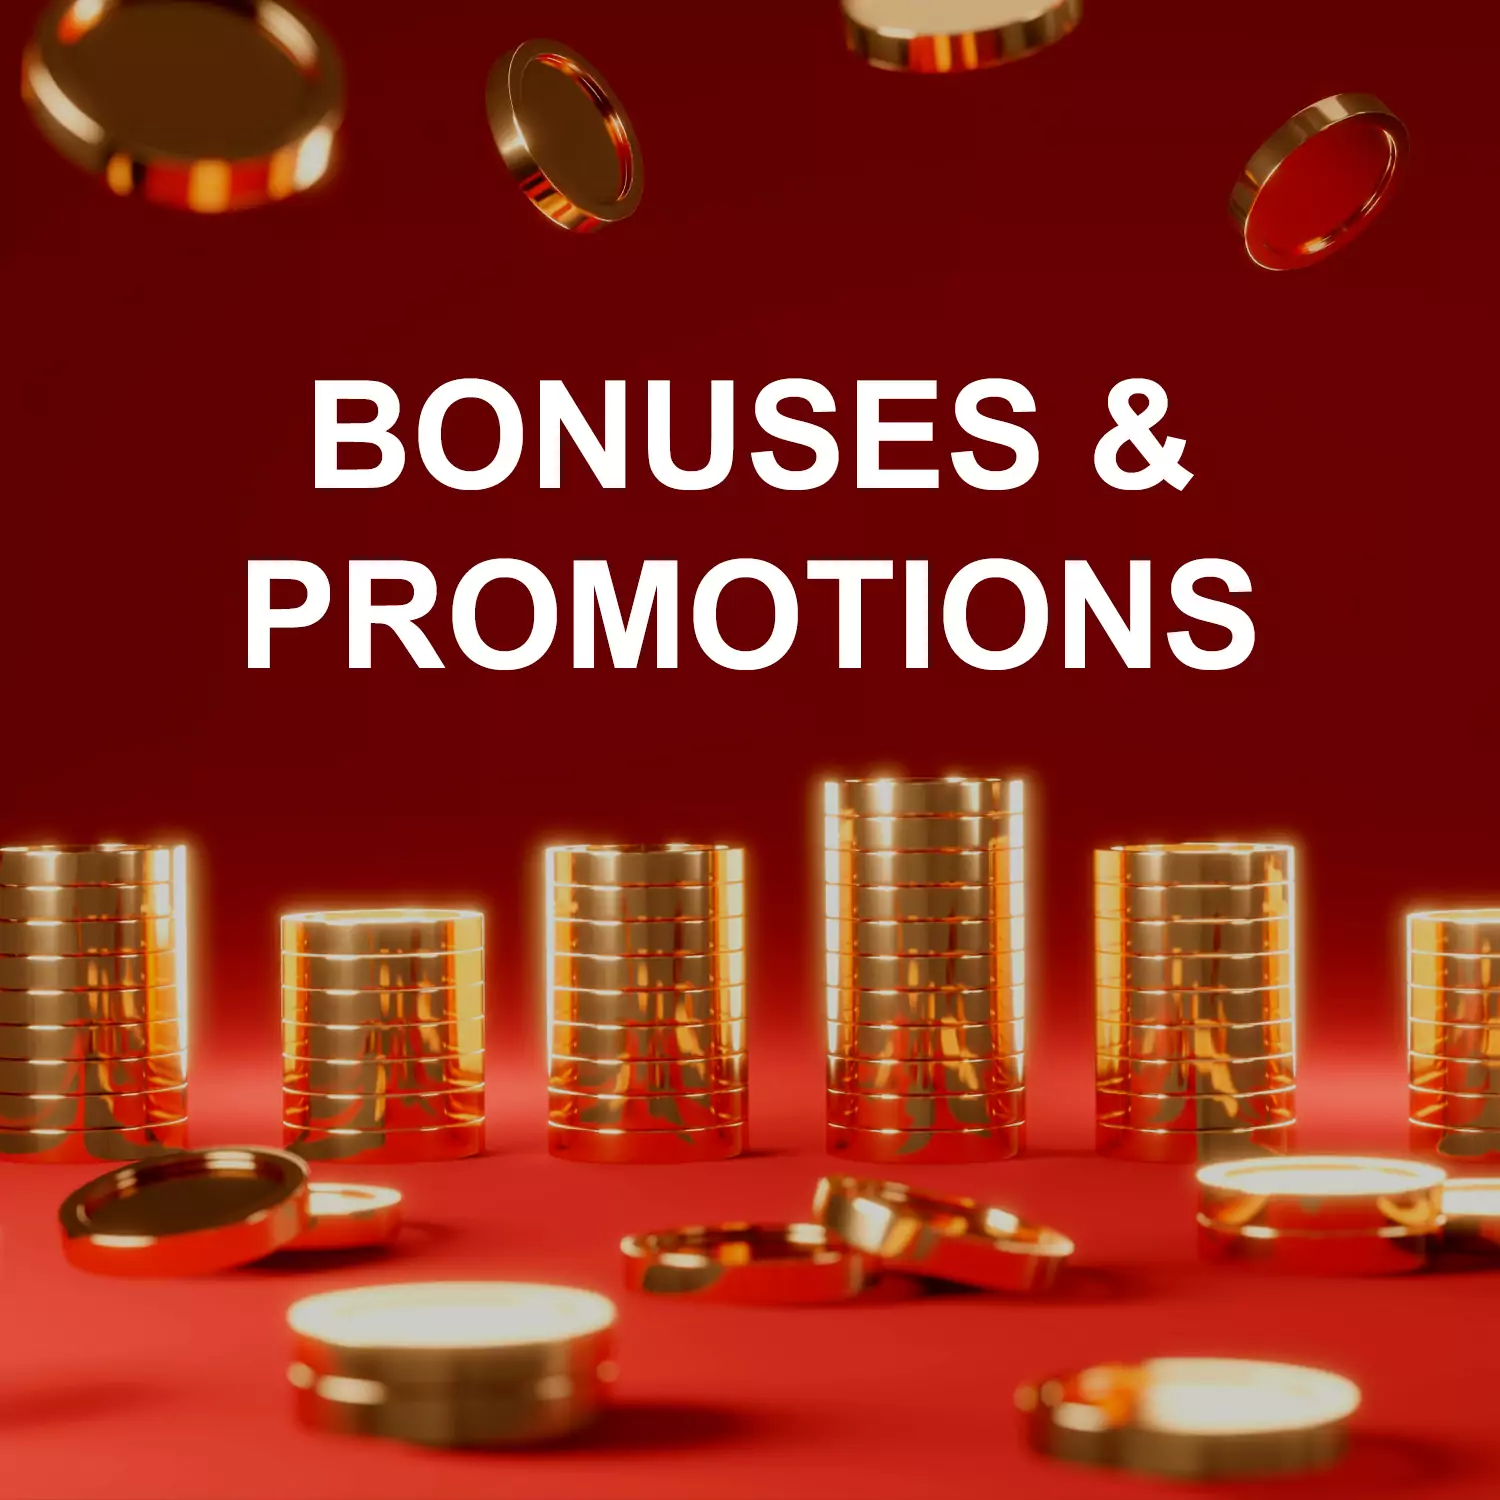 In addition to the welcome bonus there are also some other offers you can meet on the Betmaster.